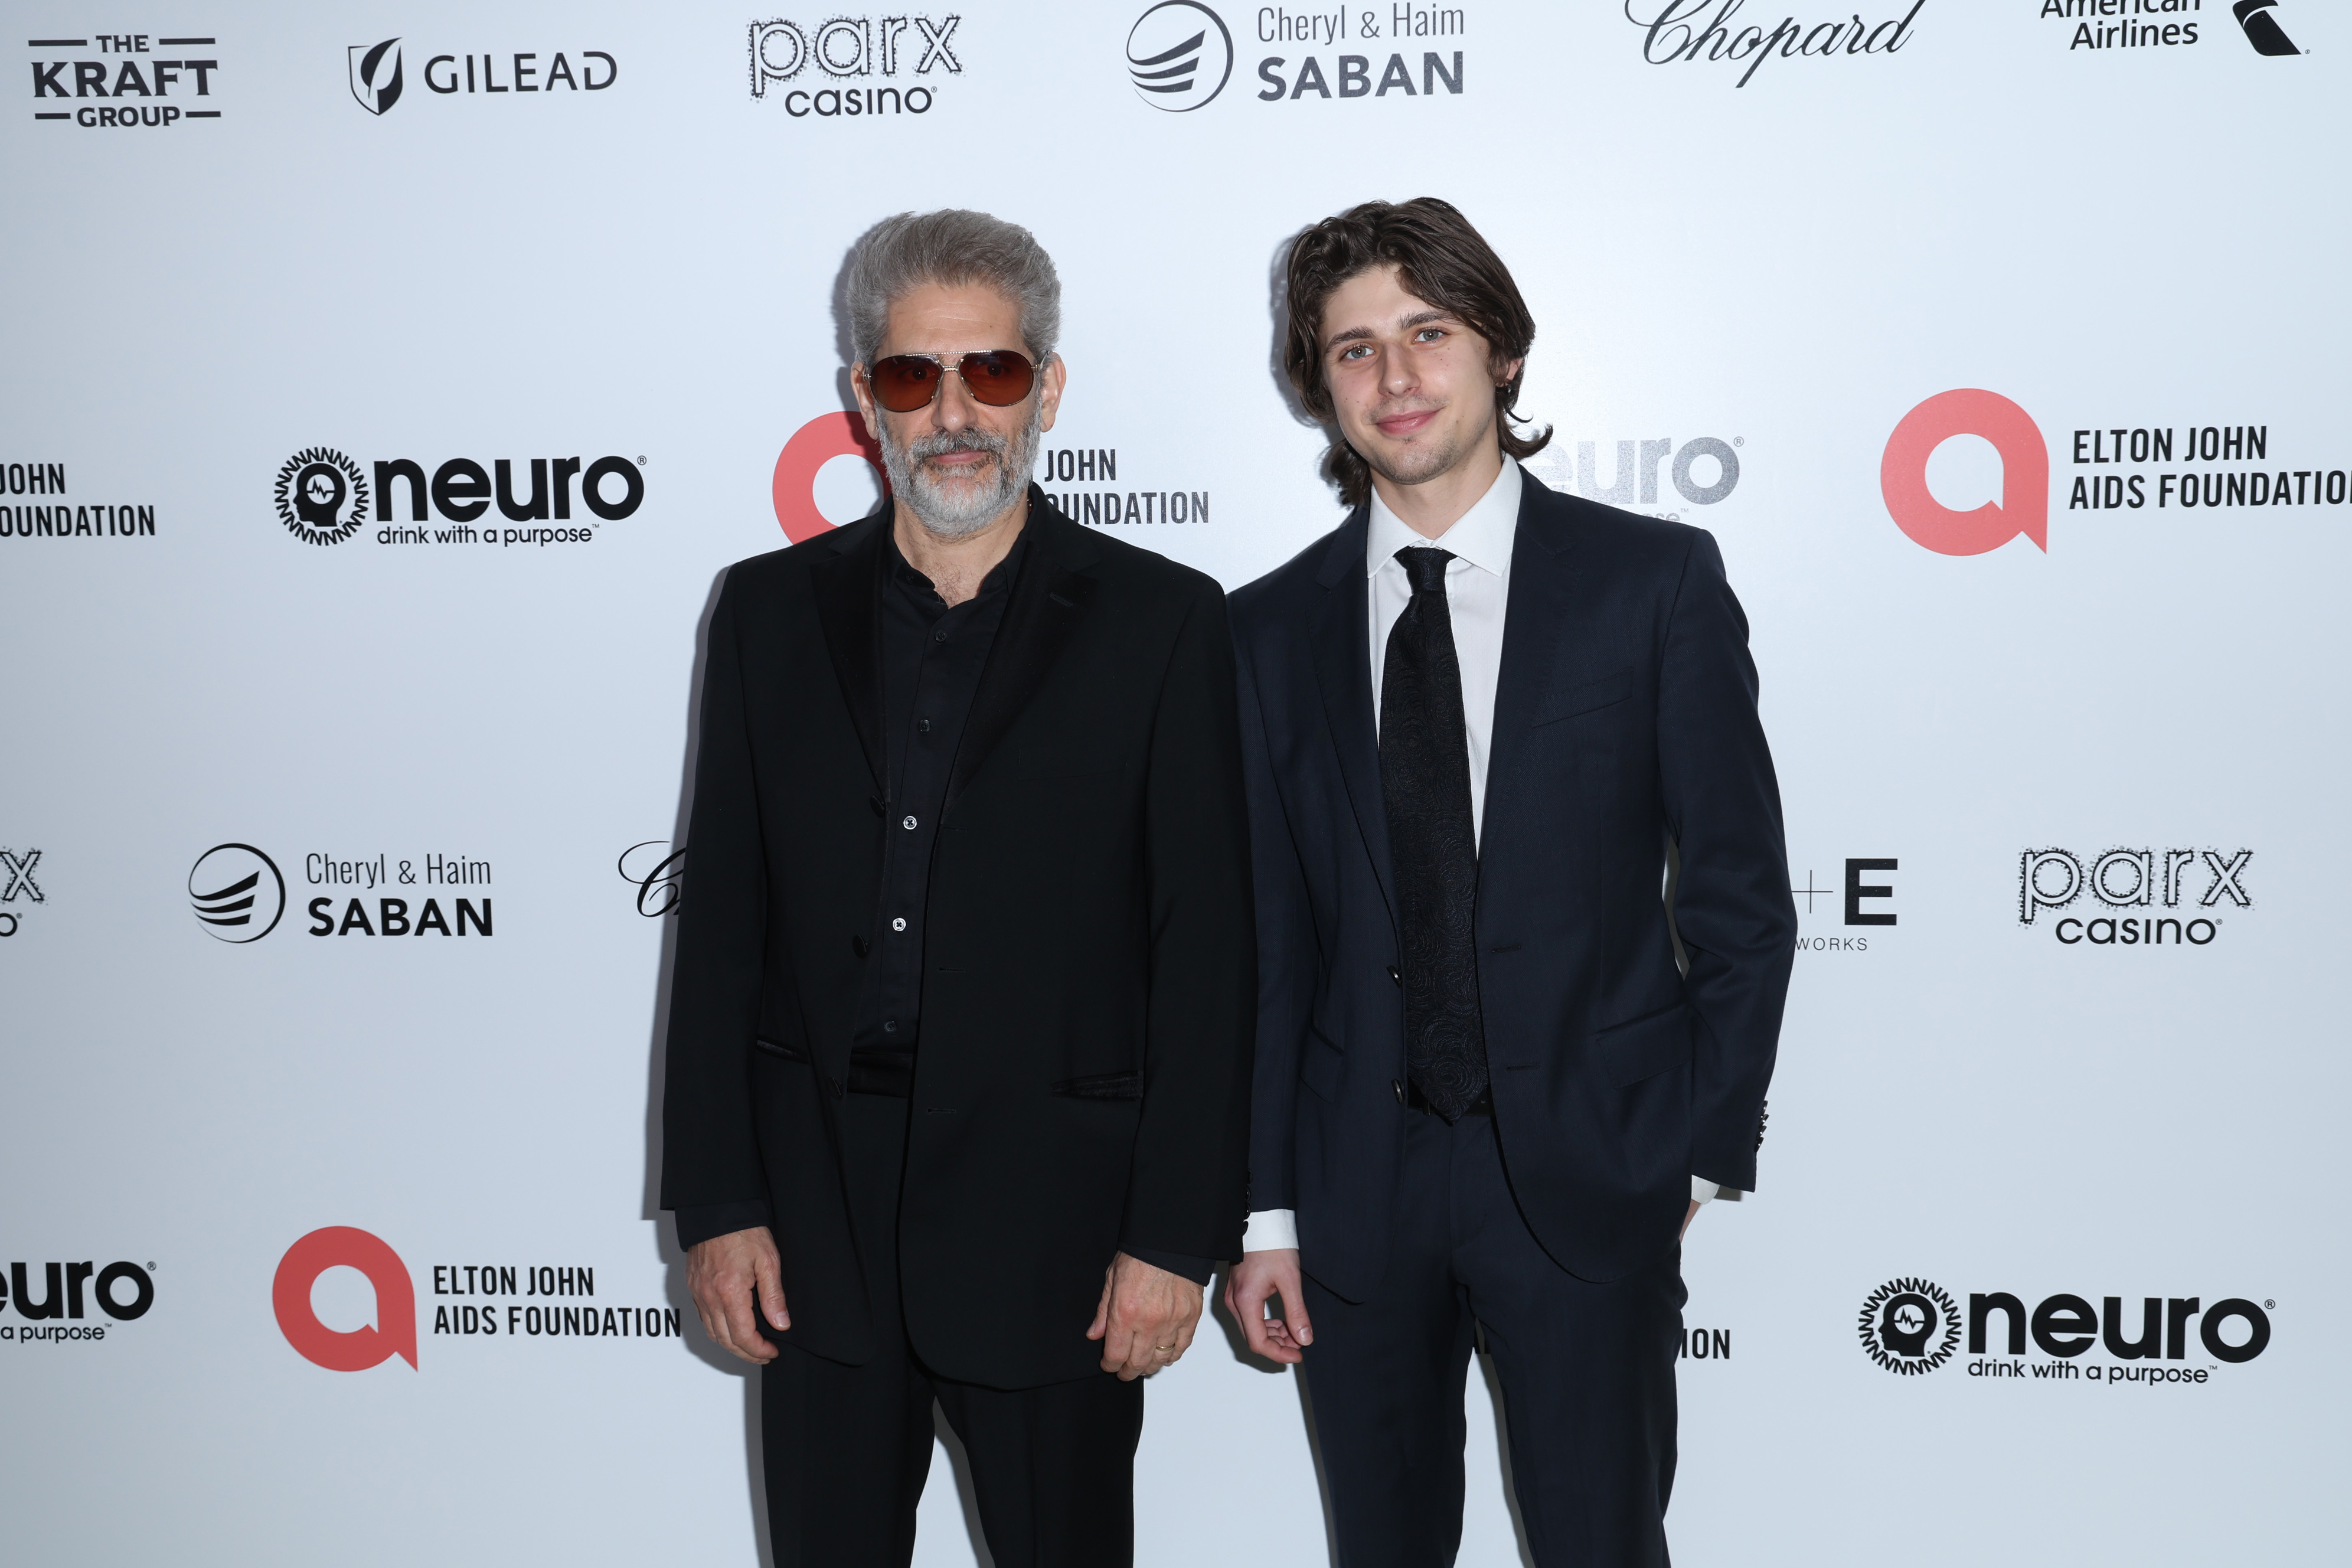 Michael Imperioli and David Imperioli attend Elton John AIDS Foundation's 31st annual academy awards viewing party on March 12, 2023, in West Hollywood, California. | Source: Getty Images